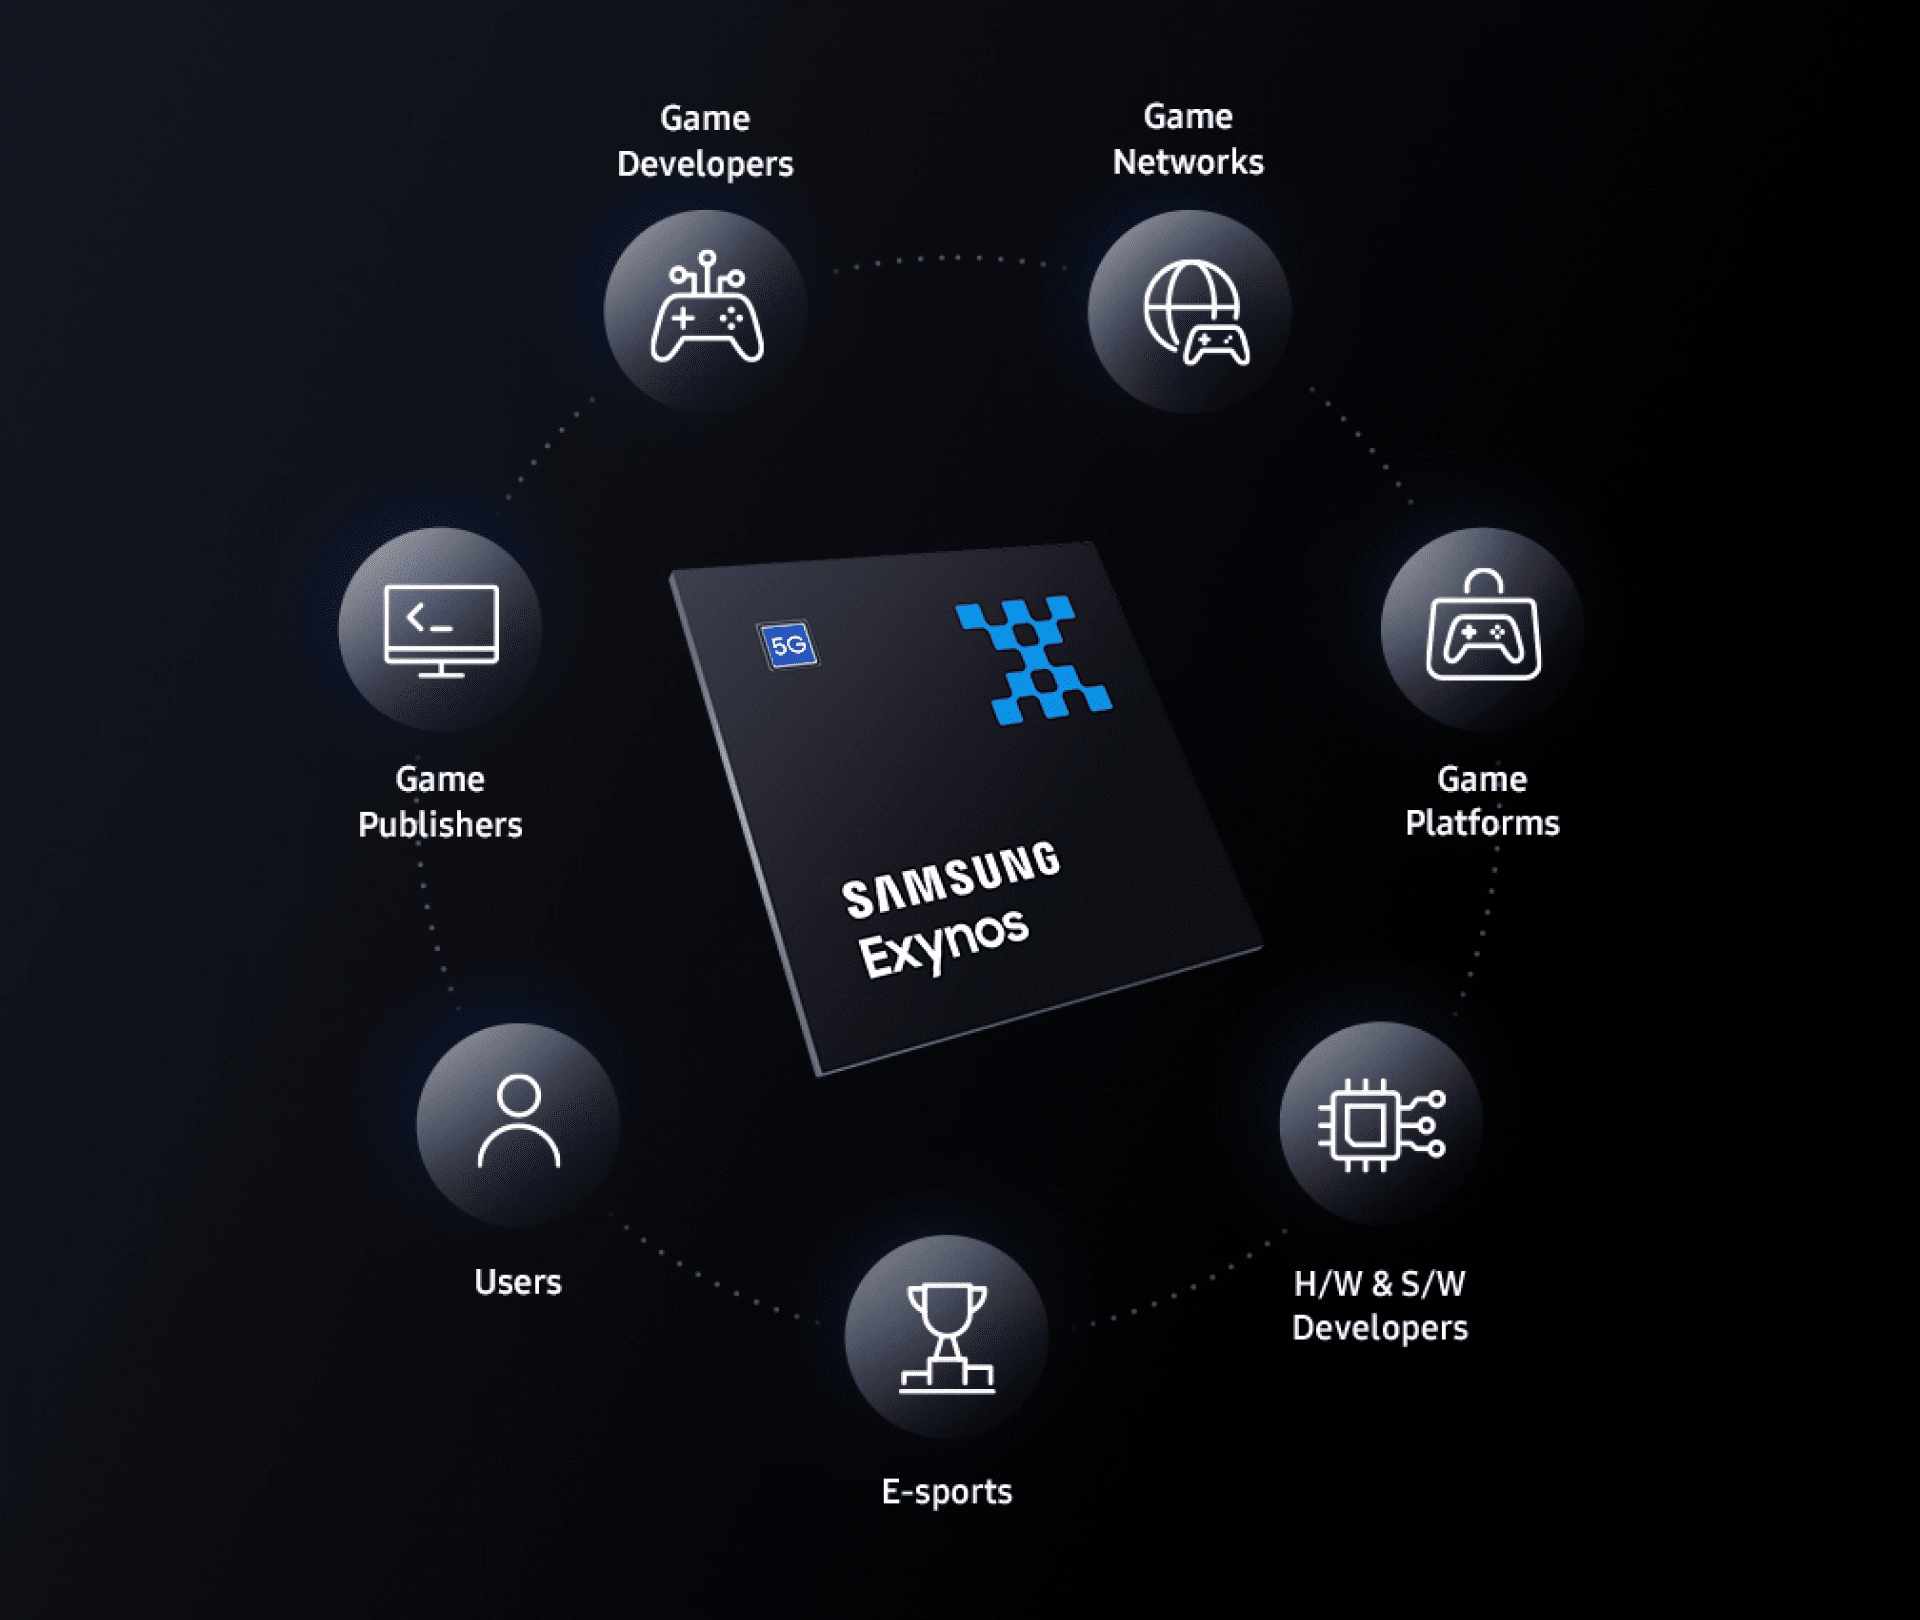 Samsung Semiconductor's Exynos is expanding collaboration within the mobile gaming ecosystem, encompassing various figures such as game publishers, developers, platforms and users.